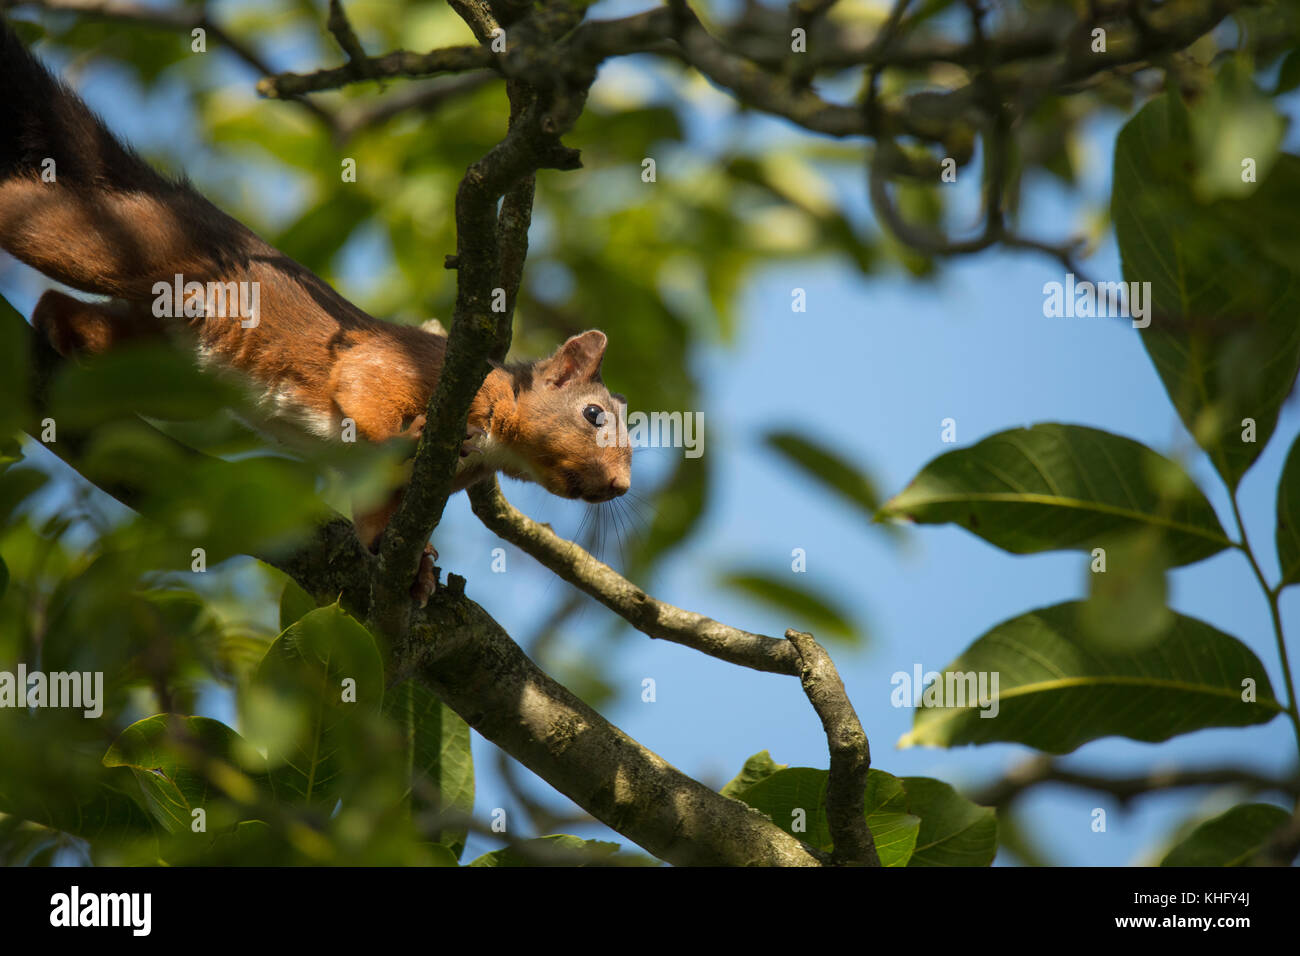 Squirrel climbing tree, looking down Stock Photo